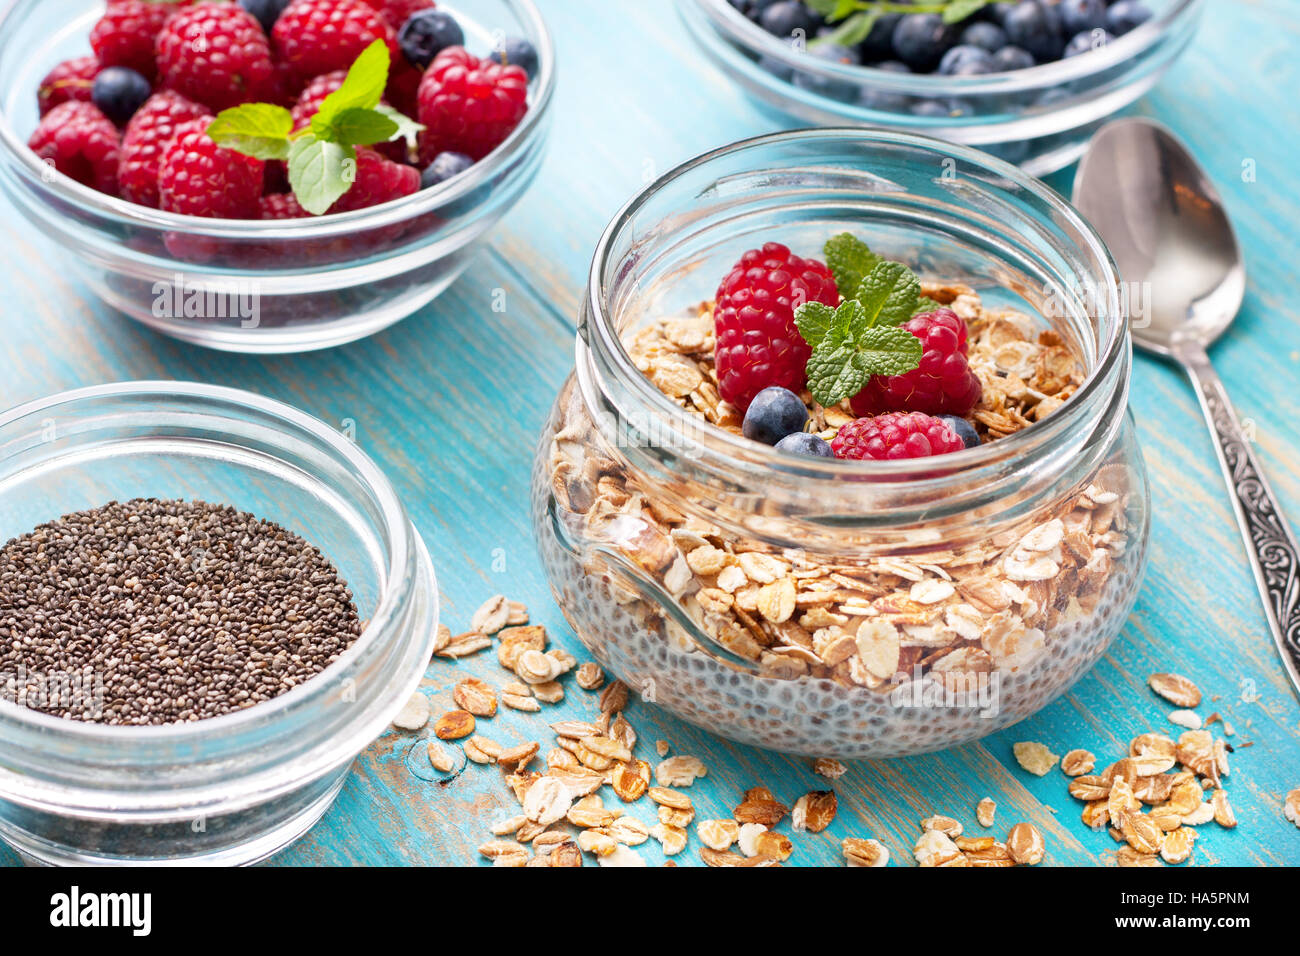 Healthy dietary breakfast. Chia pudding with muesli, raspberries, blueberries in a glass bowl, fresh berries on blue wooden background Stock Photo